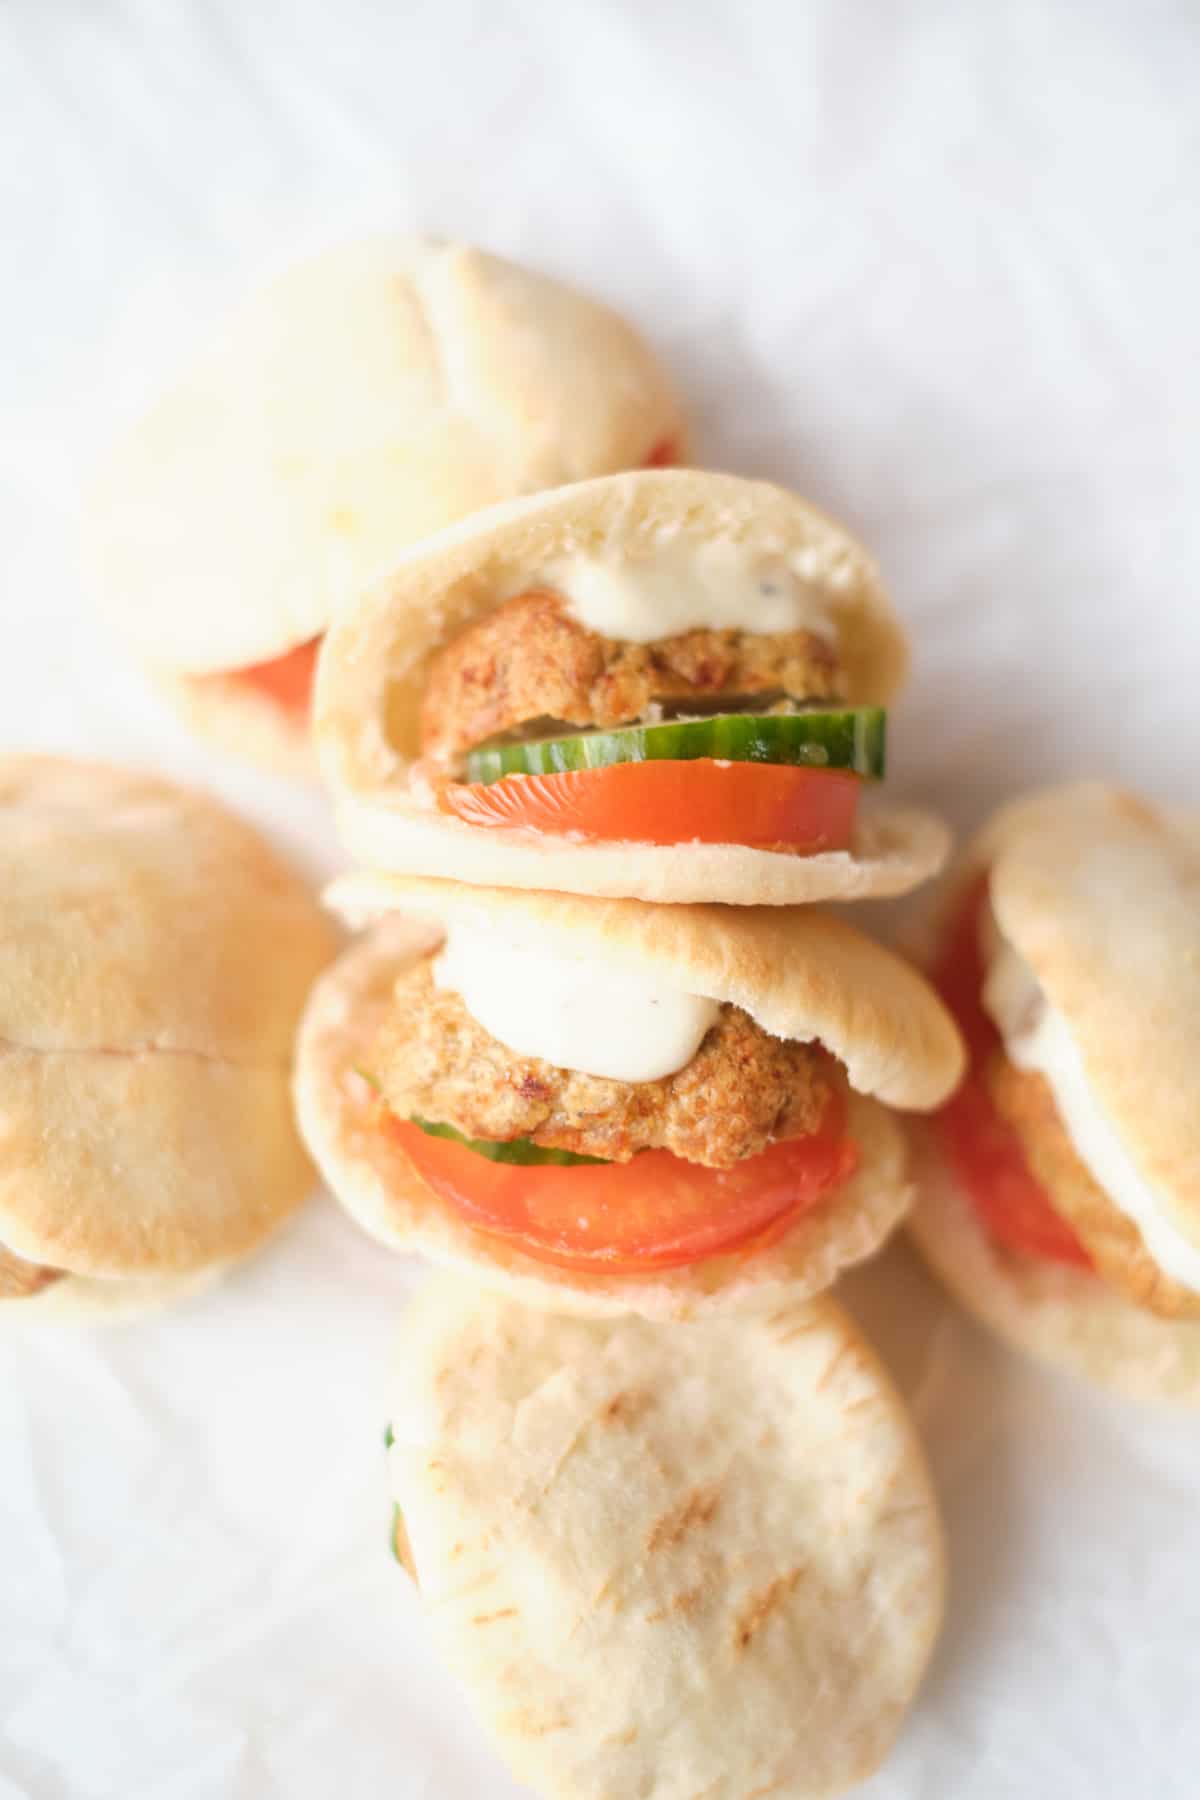 the completed meatball stuffed pita sandwiches